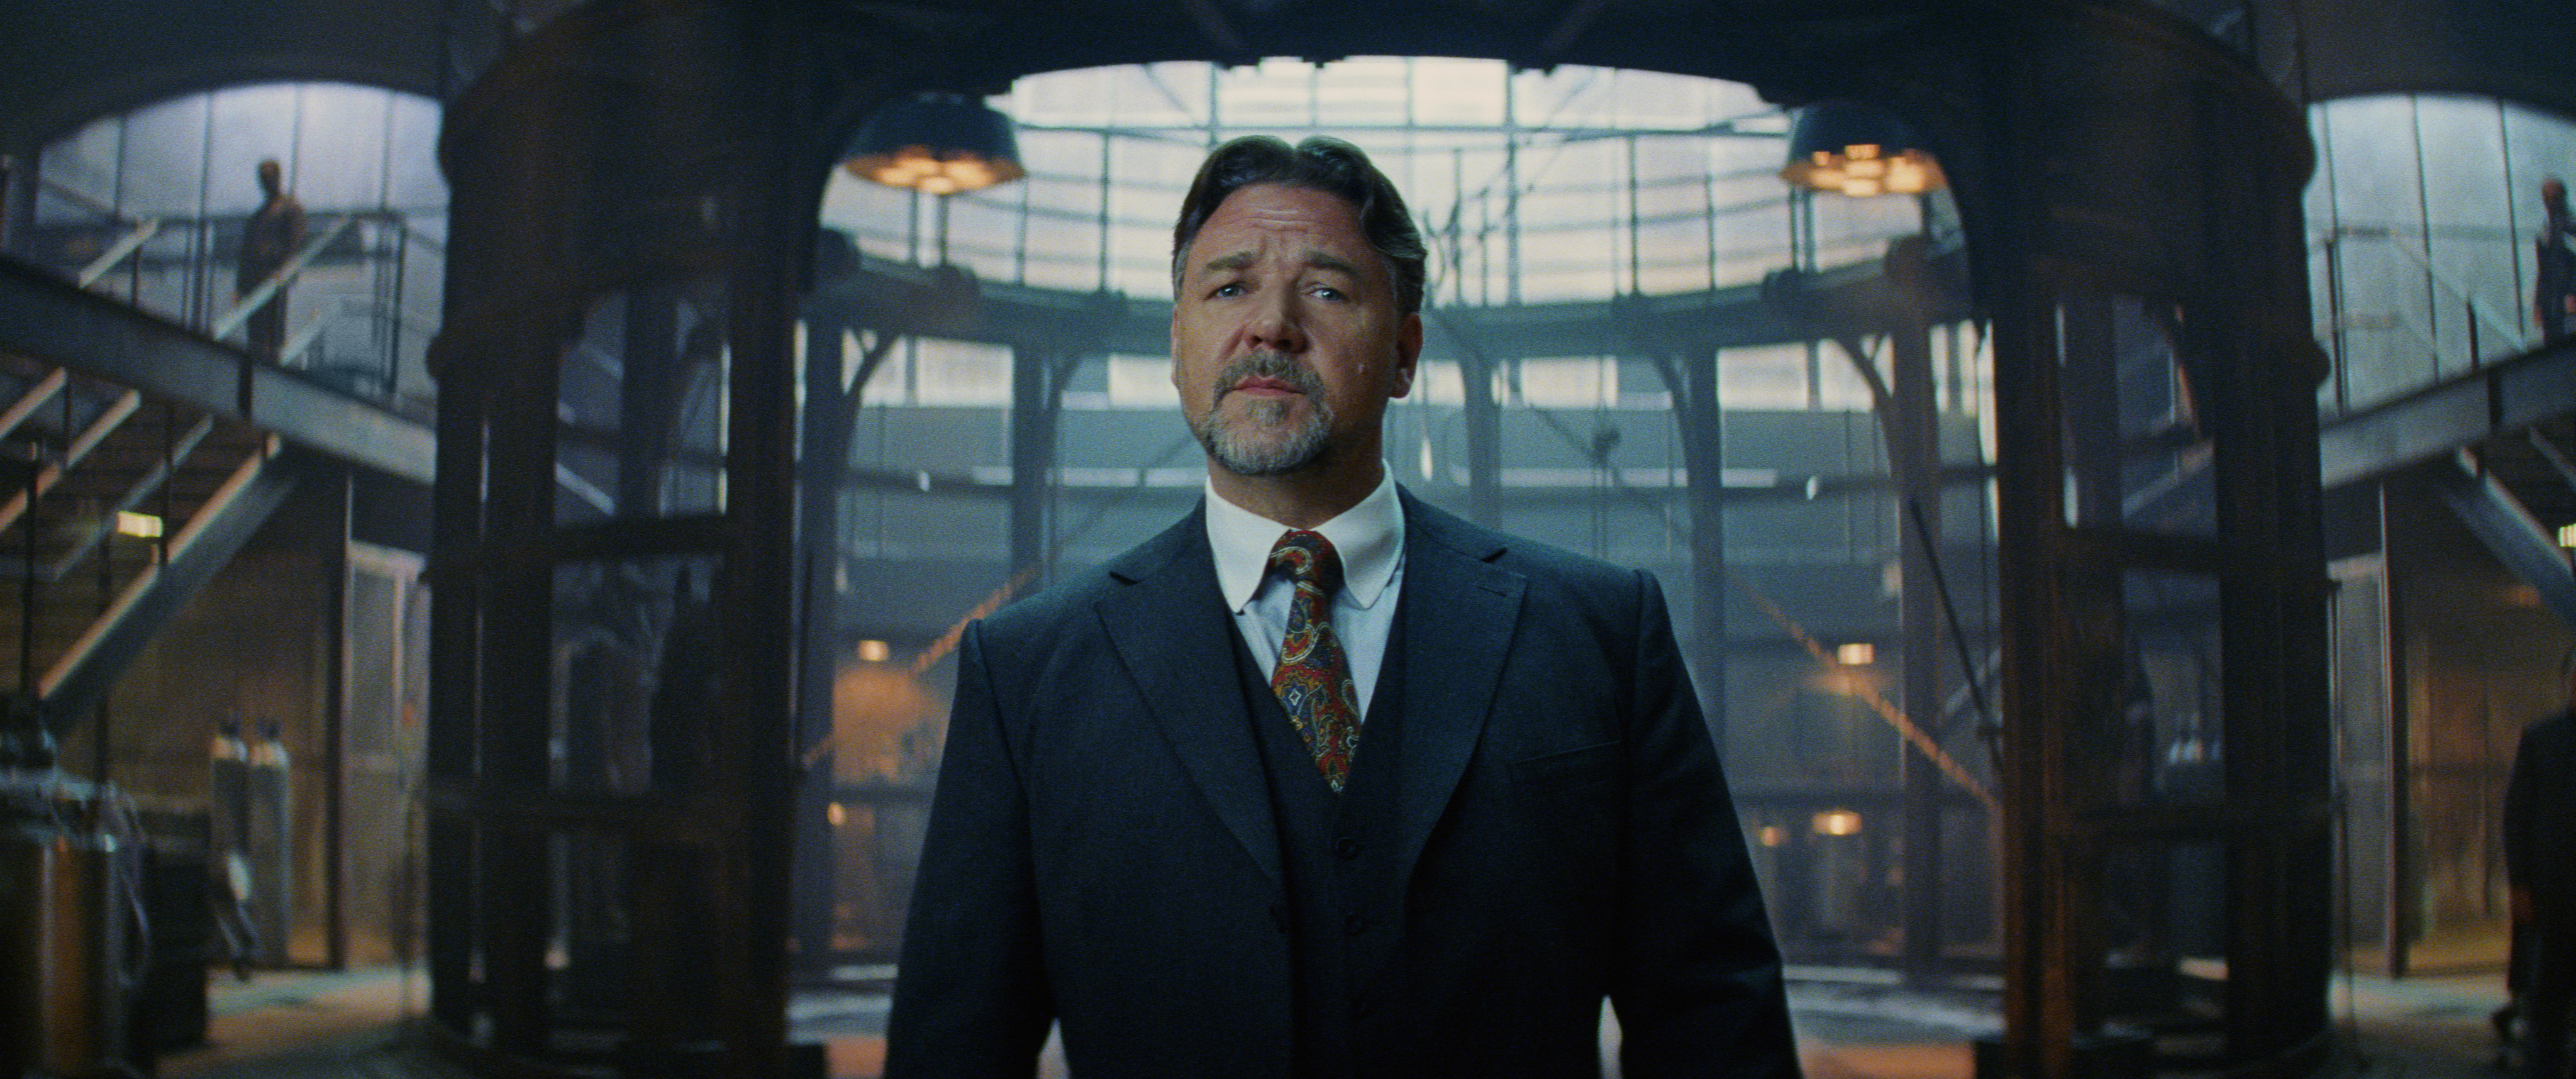 the-mummy-russell-crowe-dr-jekyll